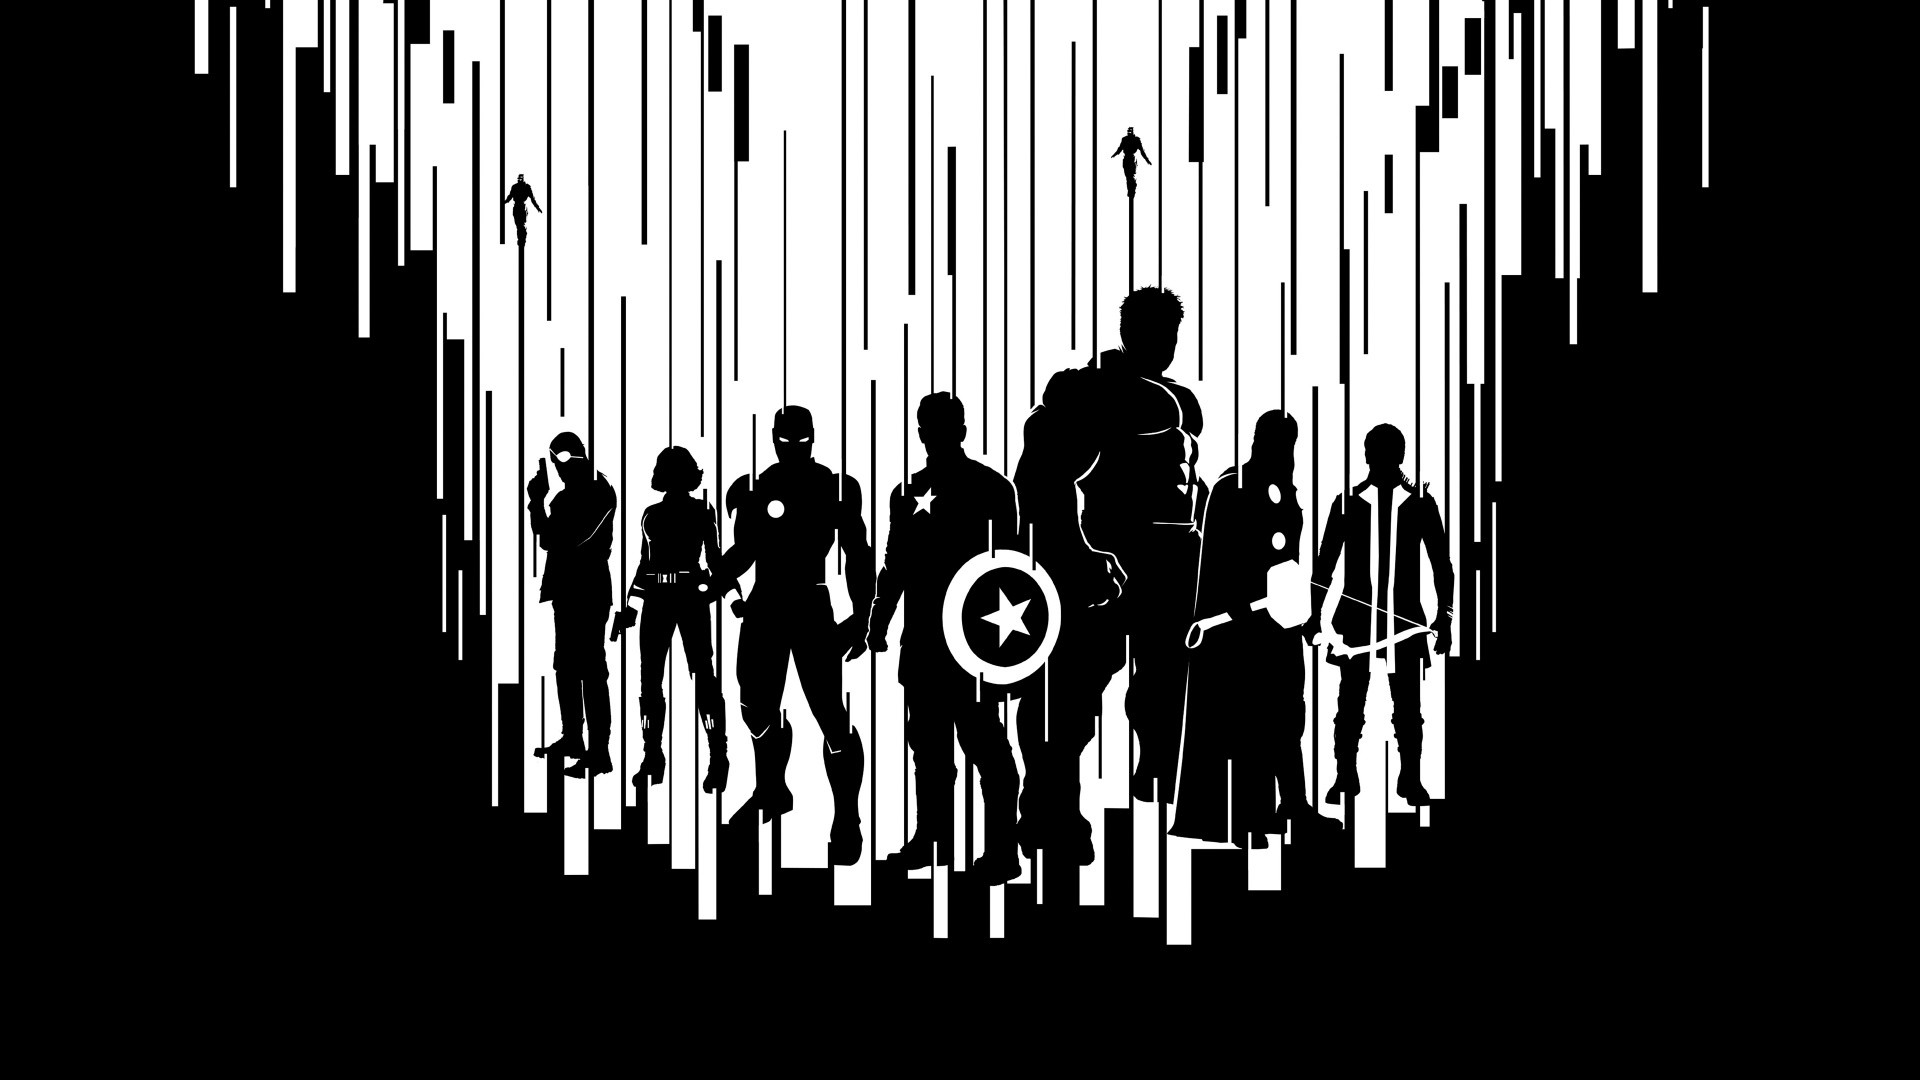 Avengers age of ultron black and white main characters